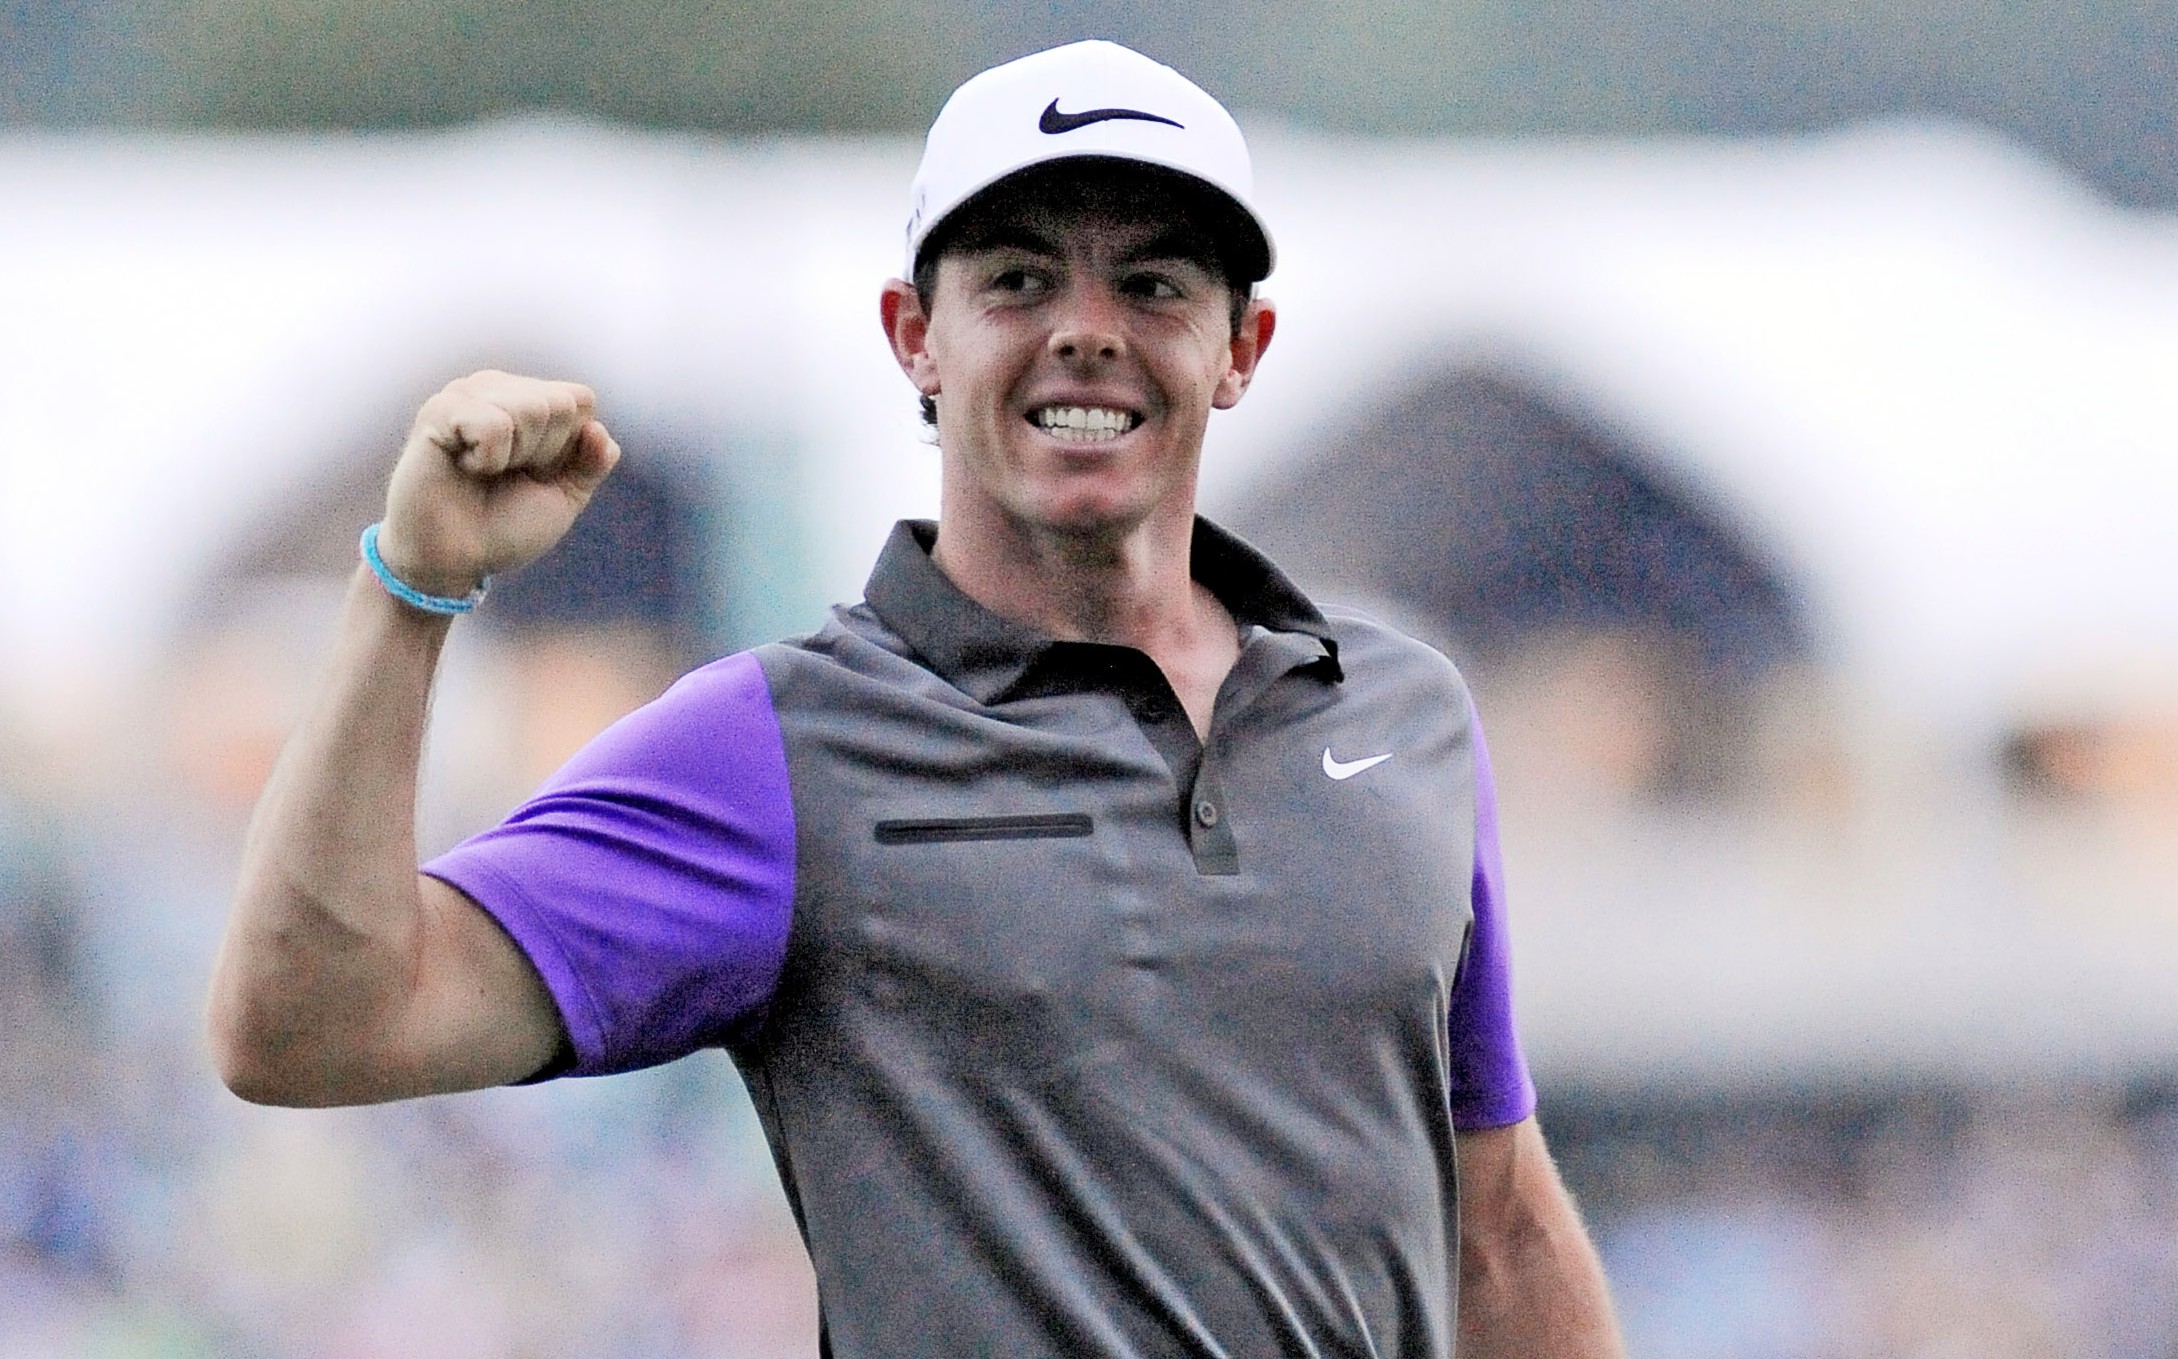 Rory Roars From Behind, Wins Deutsche Bank Championship